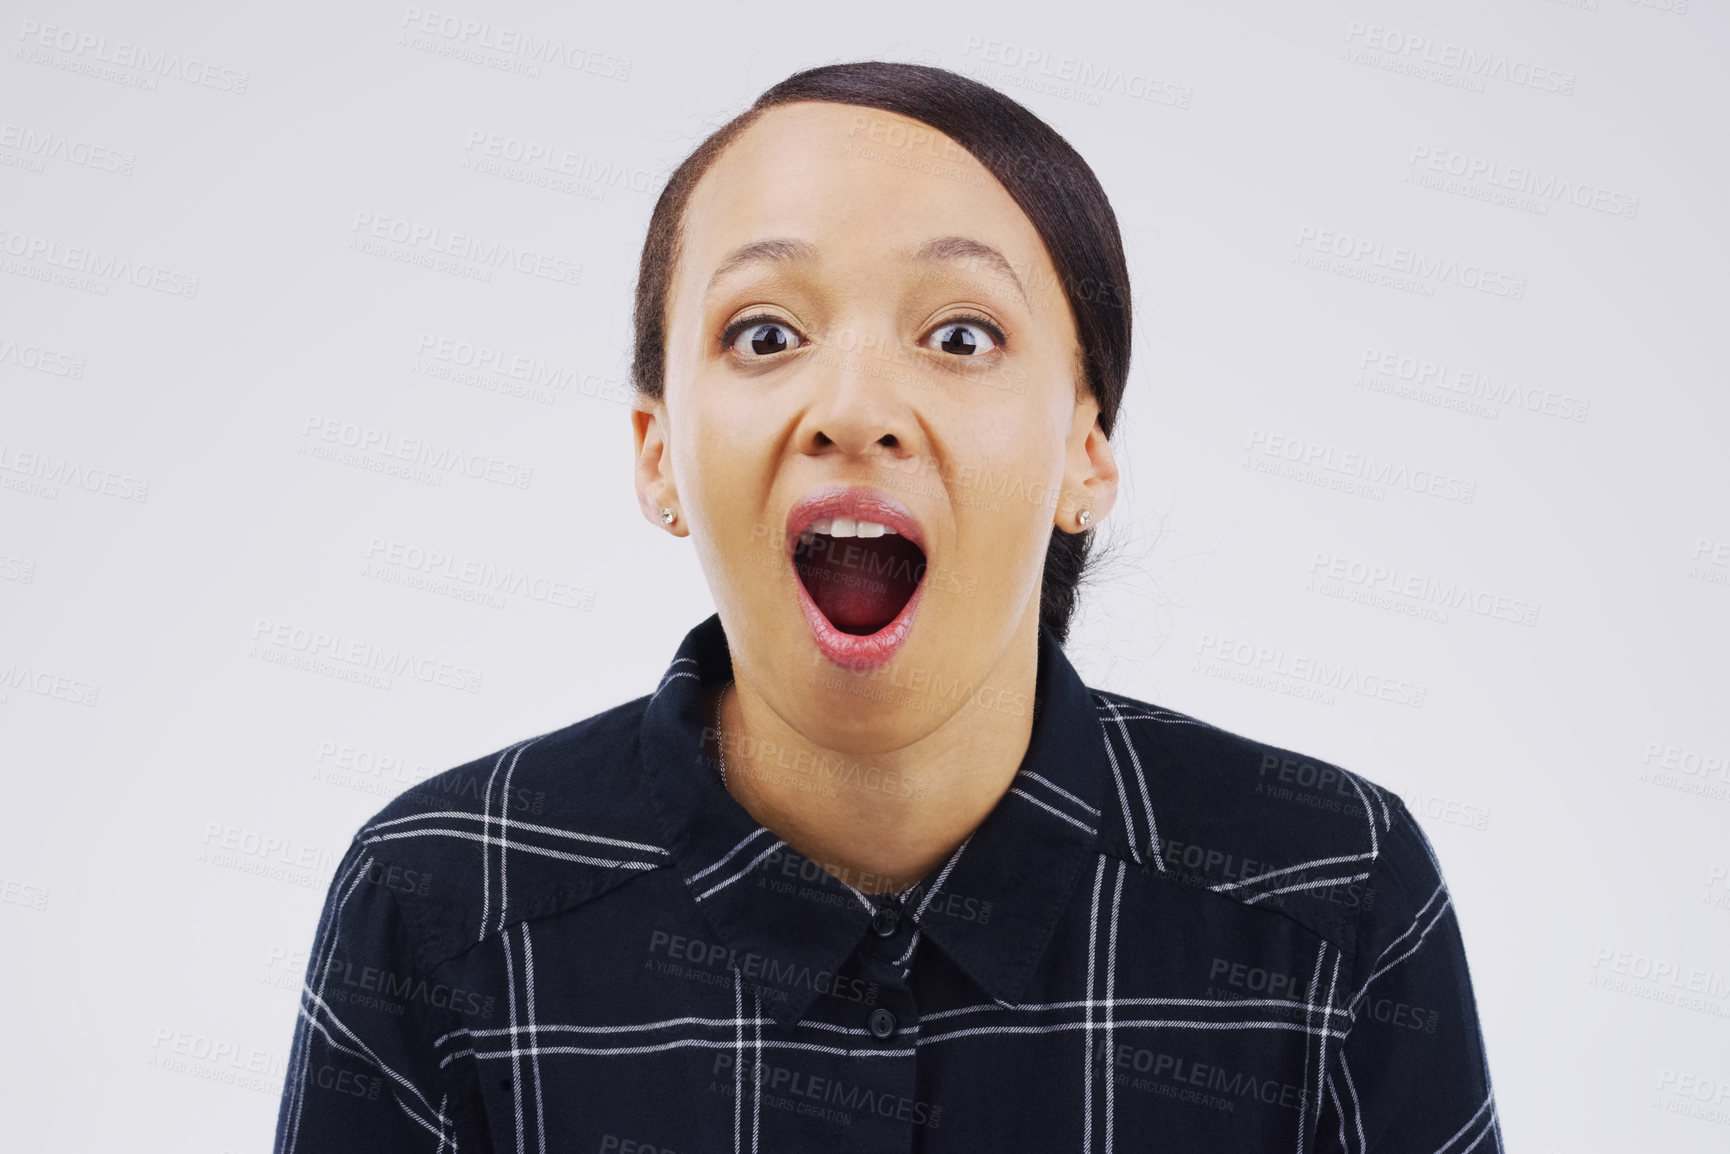 Buy stock photo Studio shot of a young woman making a funny face against a gray background